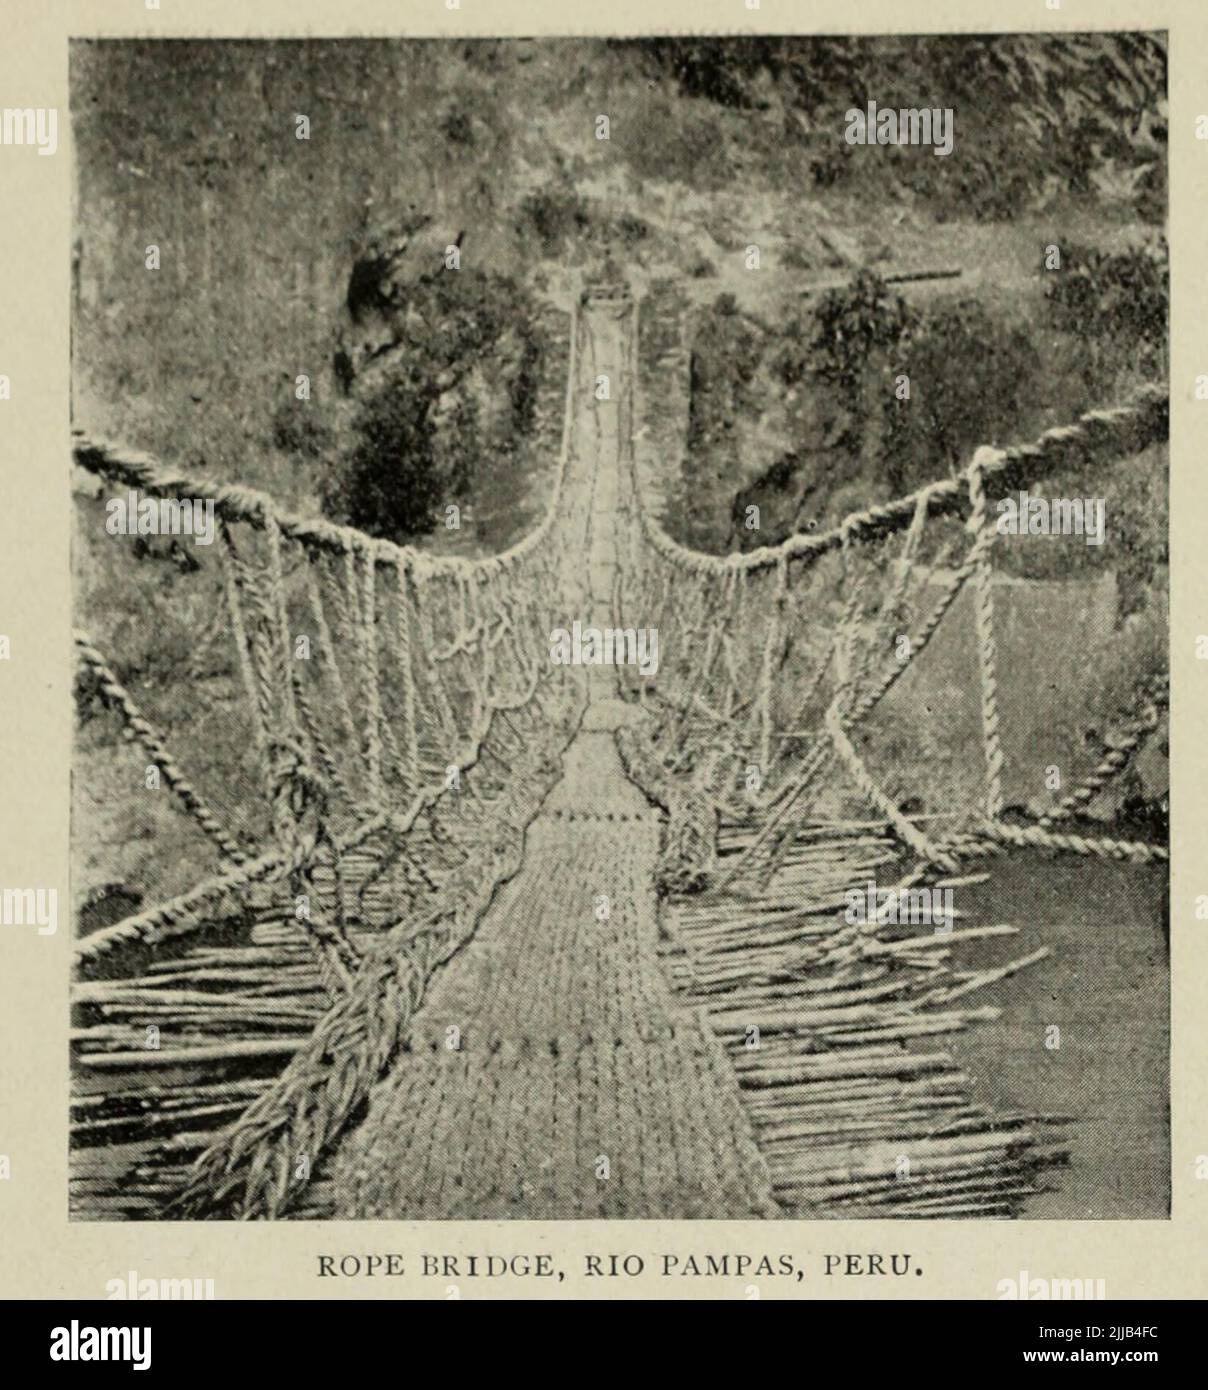 Rope Bridge Spanning the Rio Pampas, Peru from an article ' EARLY ARCHITECTURE AND ENGINEERING IN PERU ' By Mme. Alice D. Le Plongeon  from The Engineering Magazine DEVOTED TO INDUSTRIAL PROGRESS Volume VII April to September, 1894 NEW YORK The Engineering Magazine Co Stock Photo